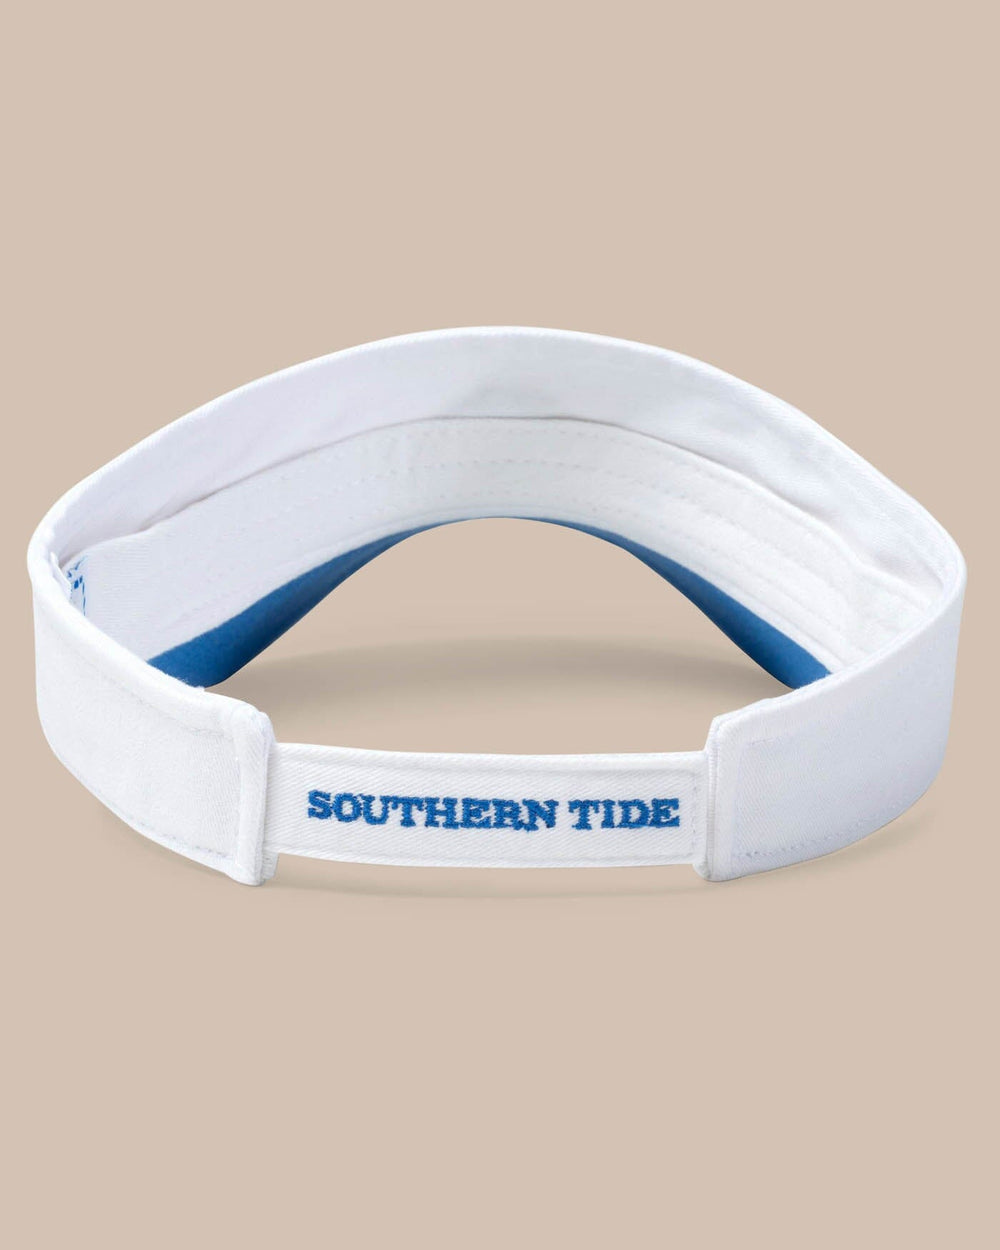 The back view of the Skipjack Visor by Southern Tide - White